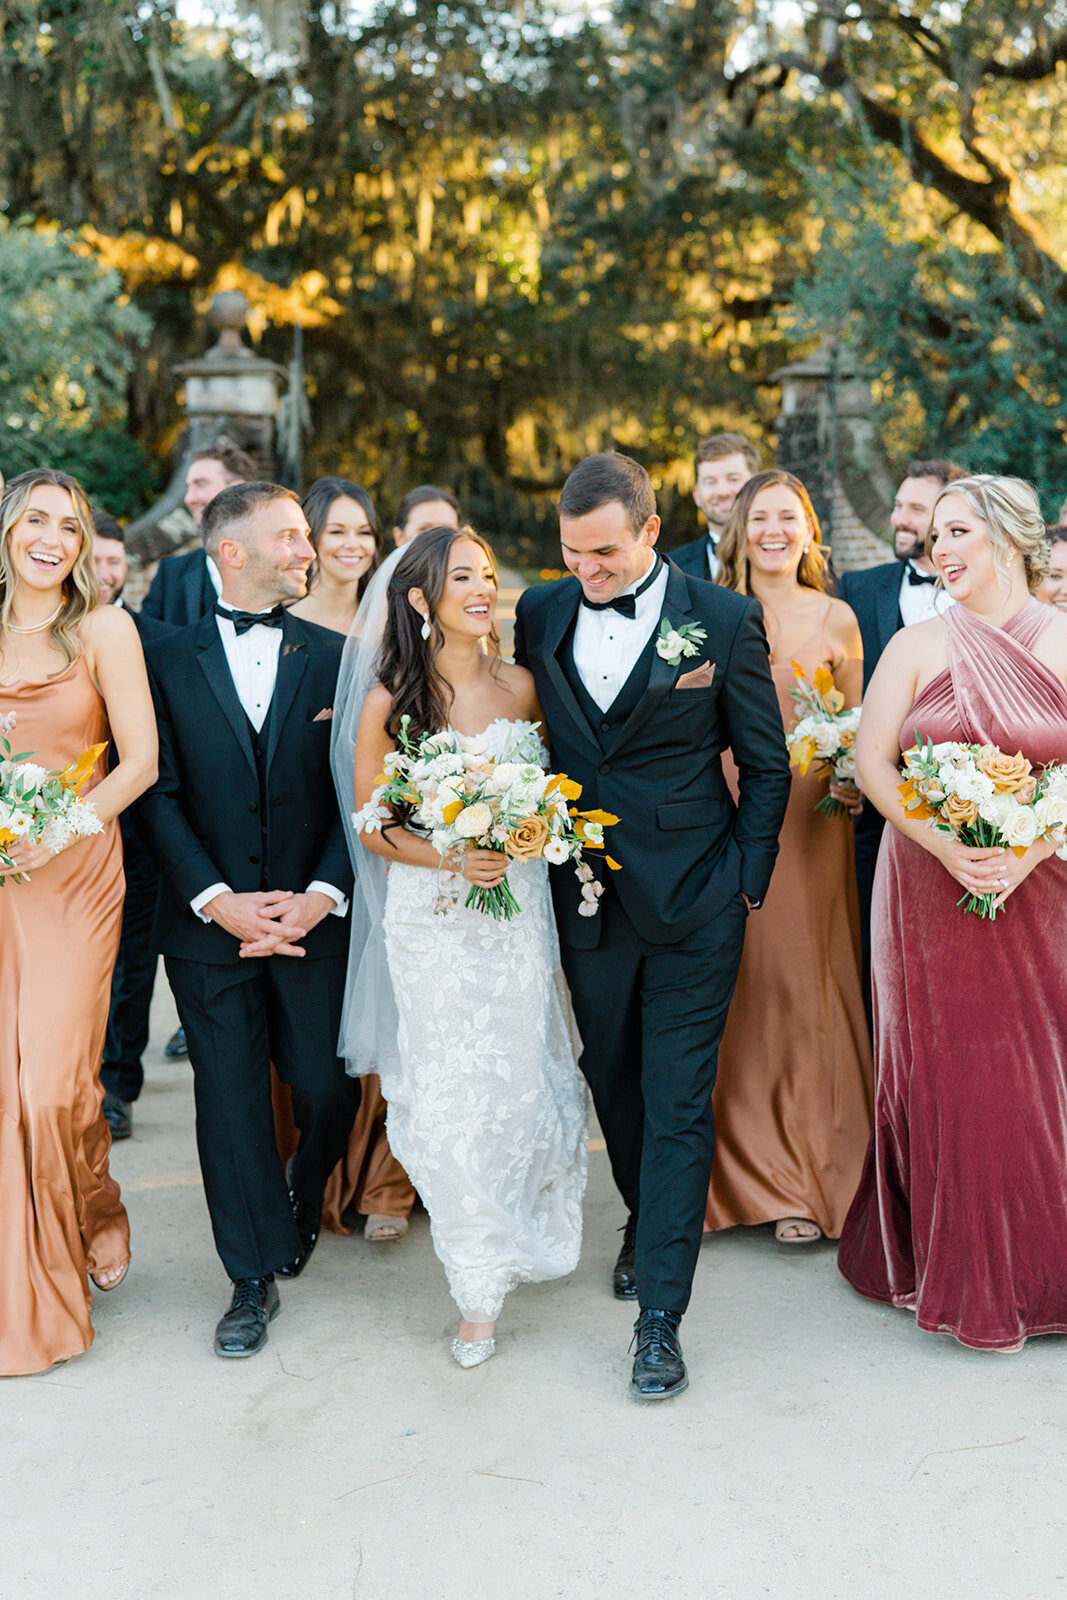 Boone Hall Fall Wedding. Golden sunset light hitting spanish moss and live oak trees. Bridesmaids in jewel-toned dresses. Full bridal party walking with bride and groom. Charleston destination wedding photographer.